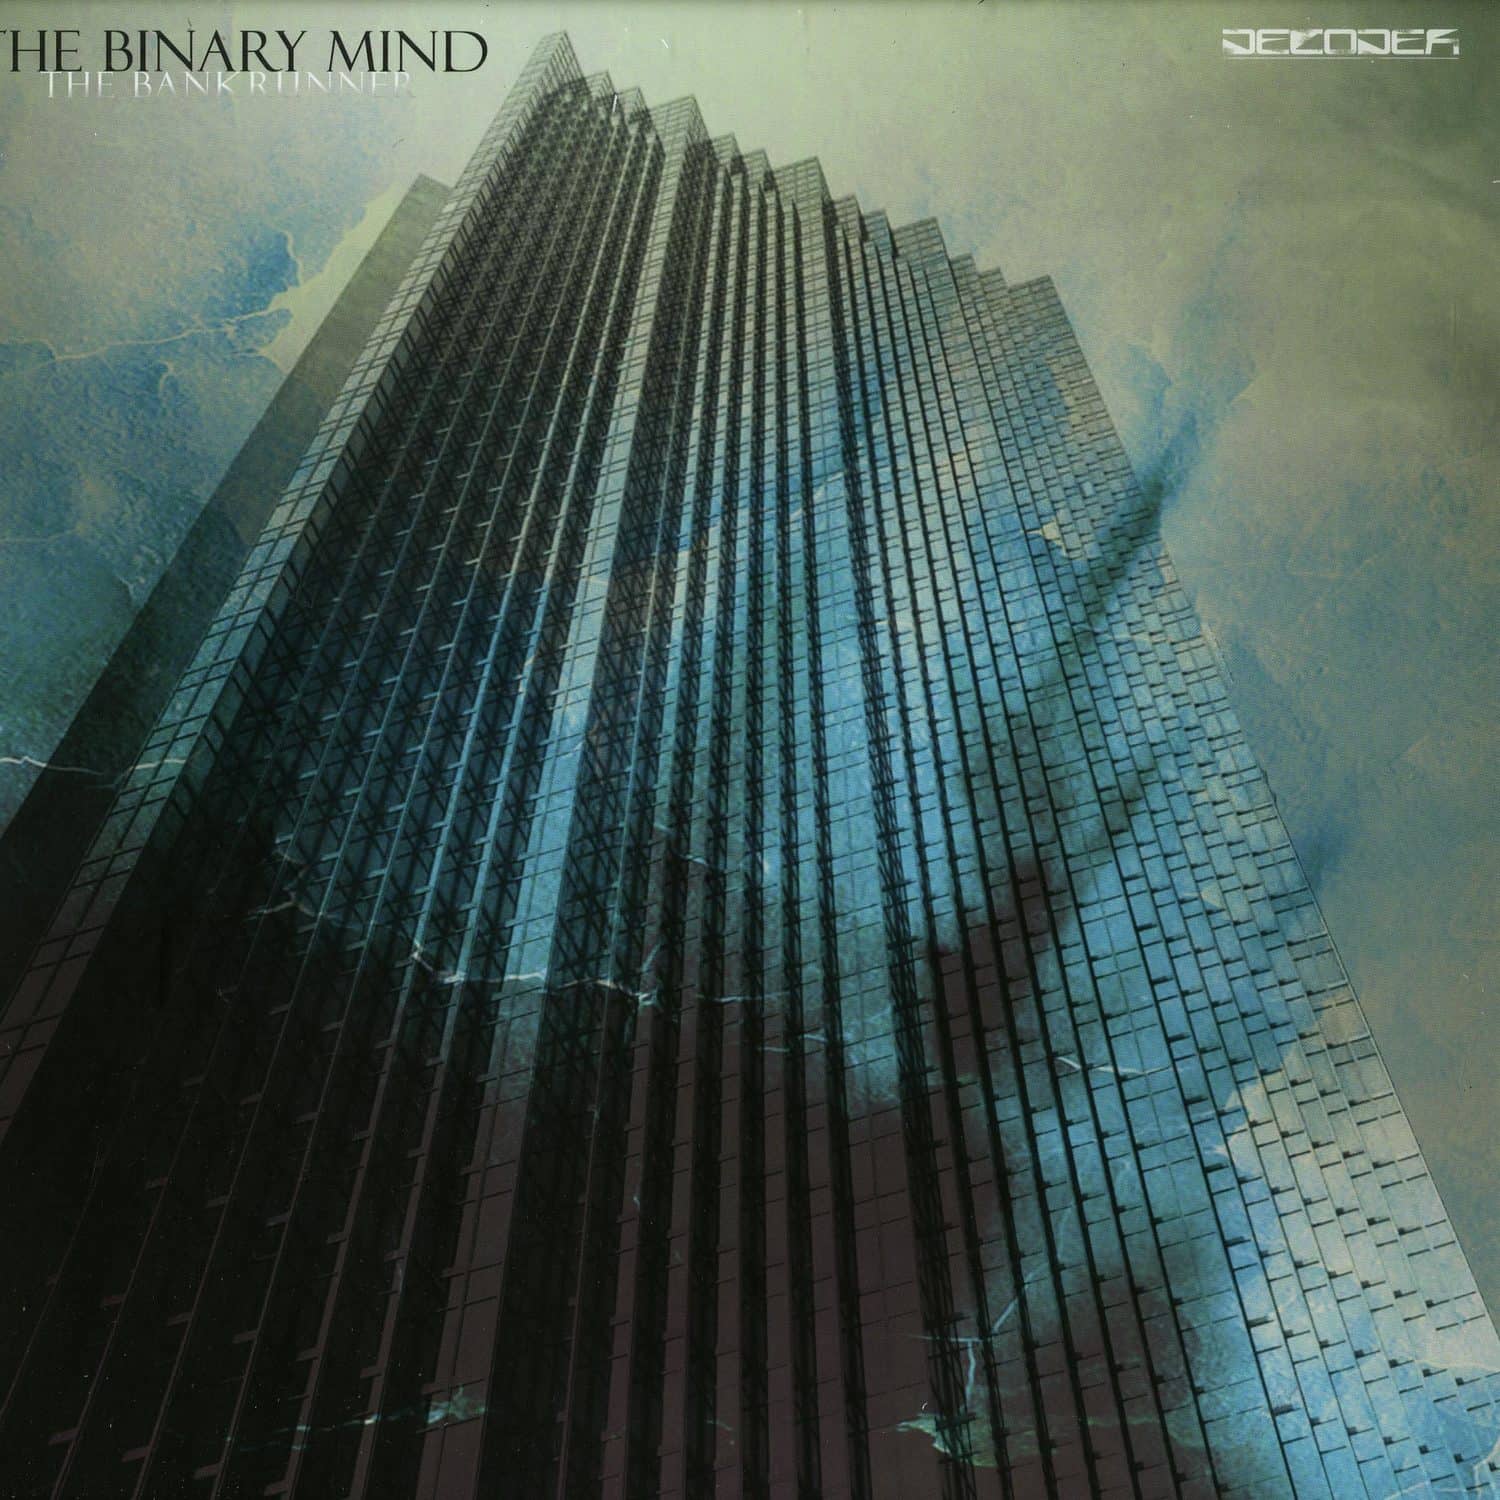 The Binary Mind - THE BANKRUNNER